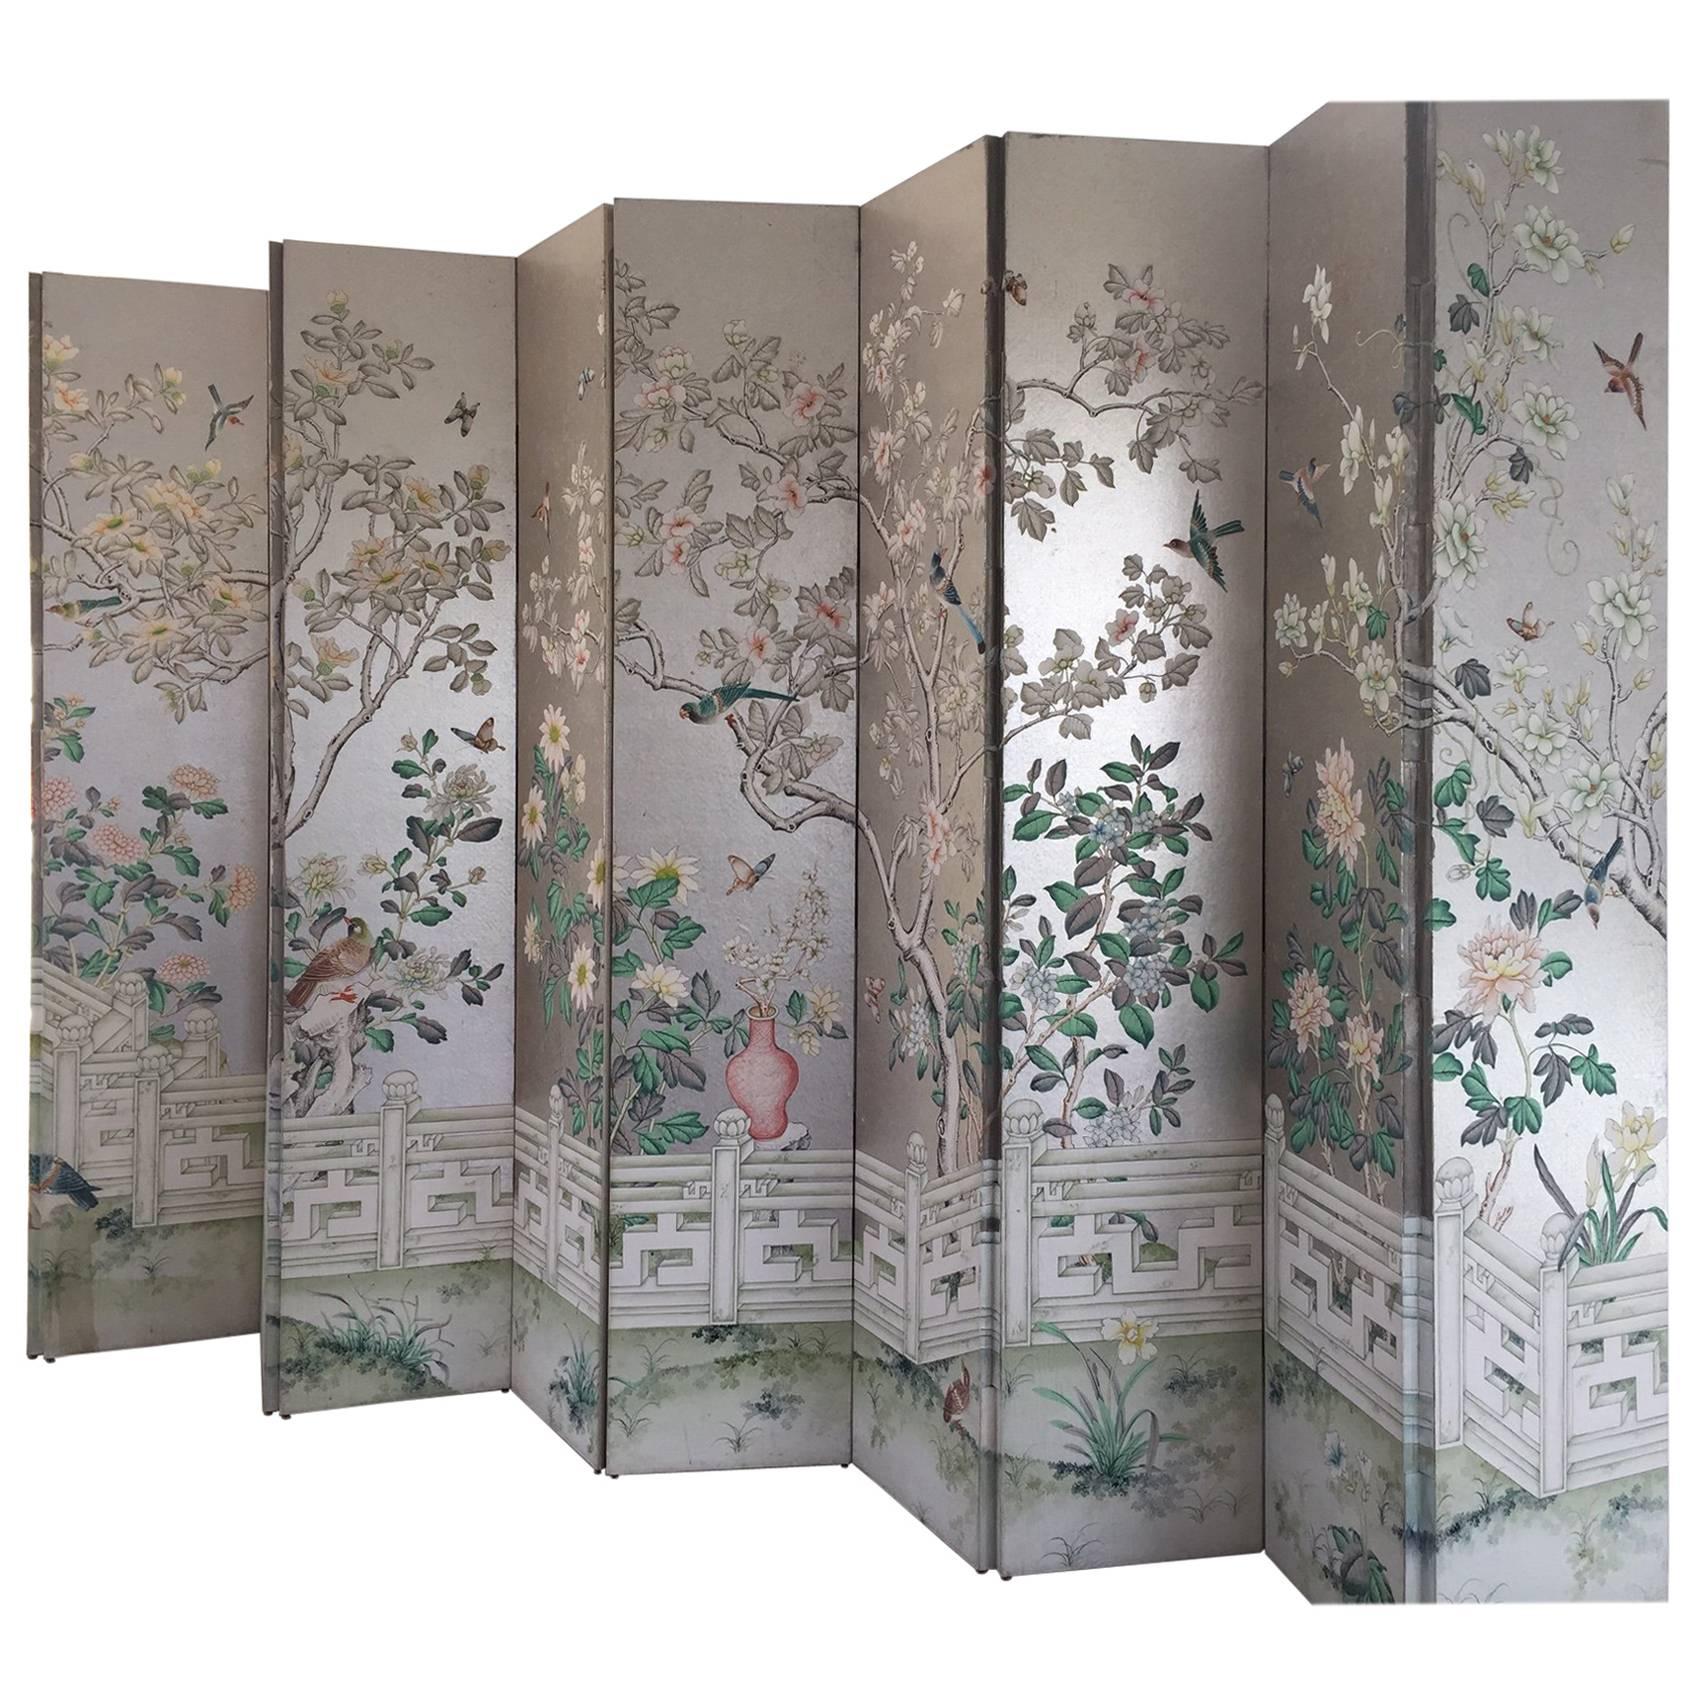 Magnificent and Monumental Silver Leaf Hand-Painted Pair of Five-Panel Screens